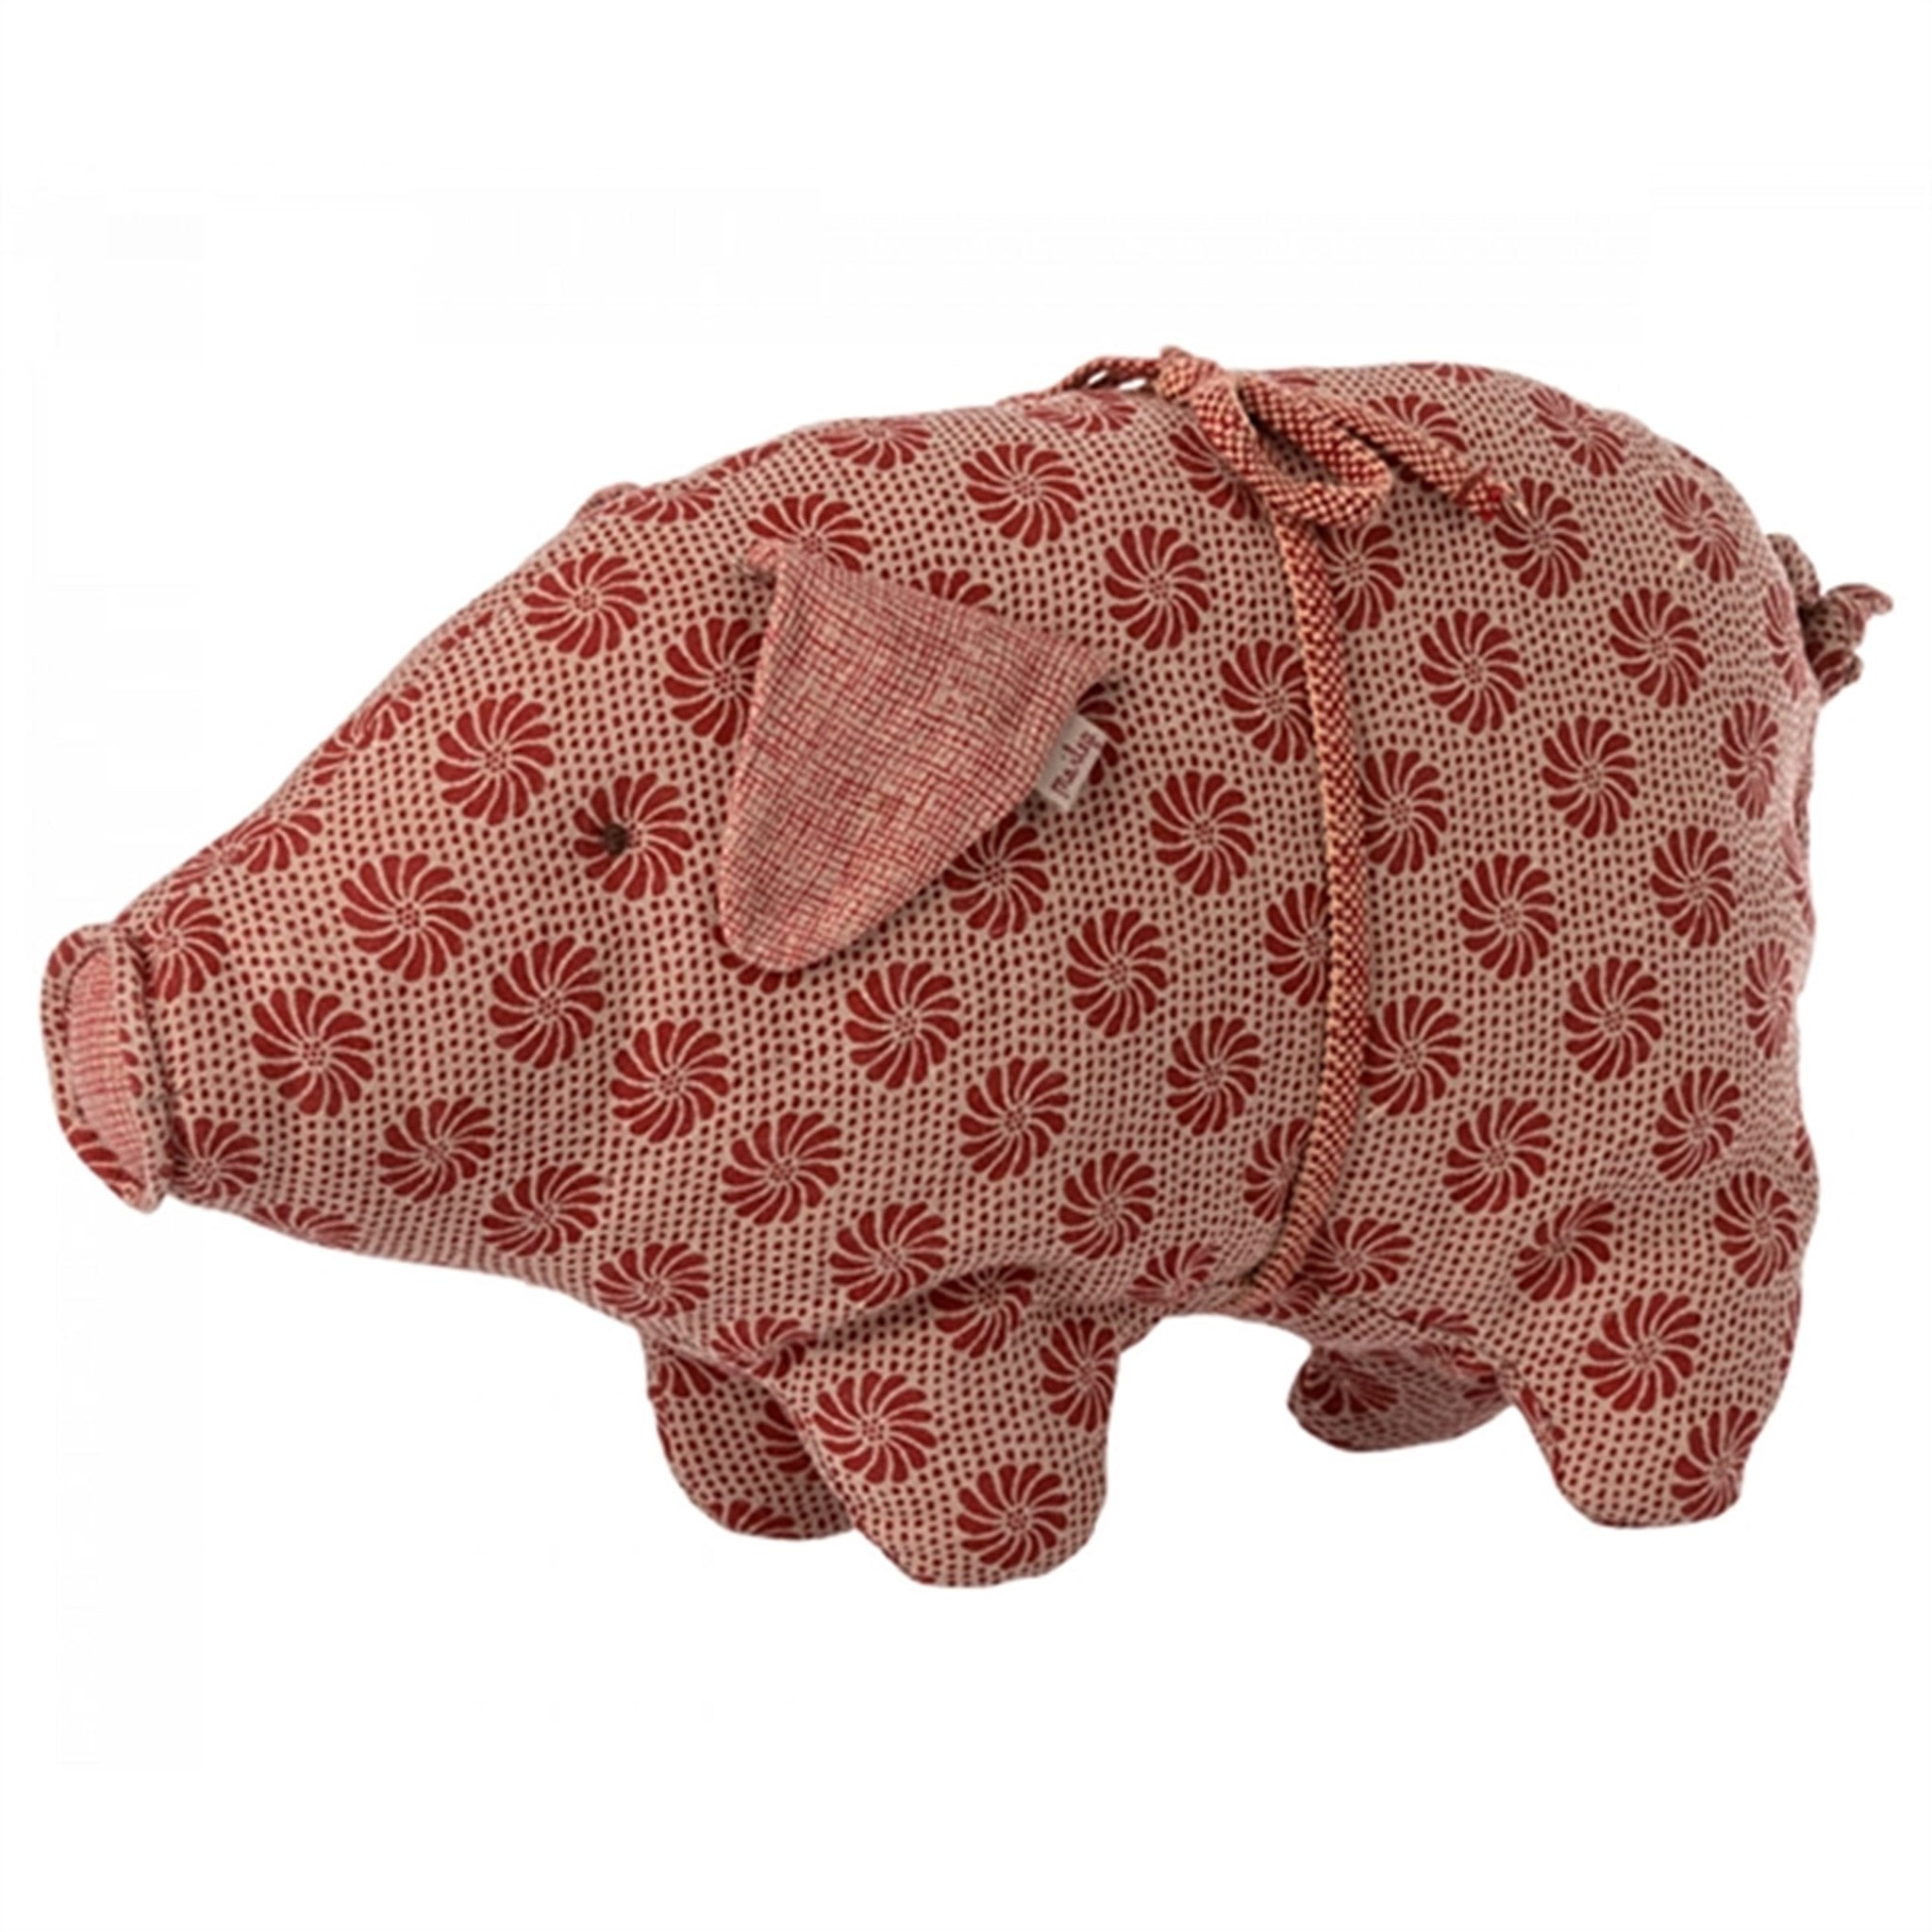 Maileg Pig, Small - Red Flower 2